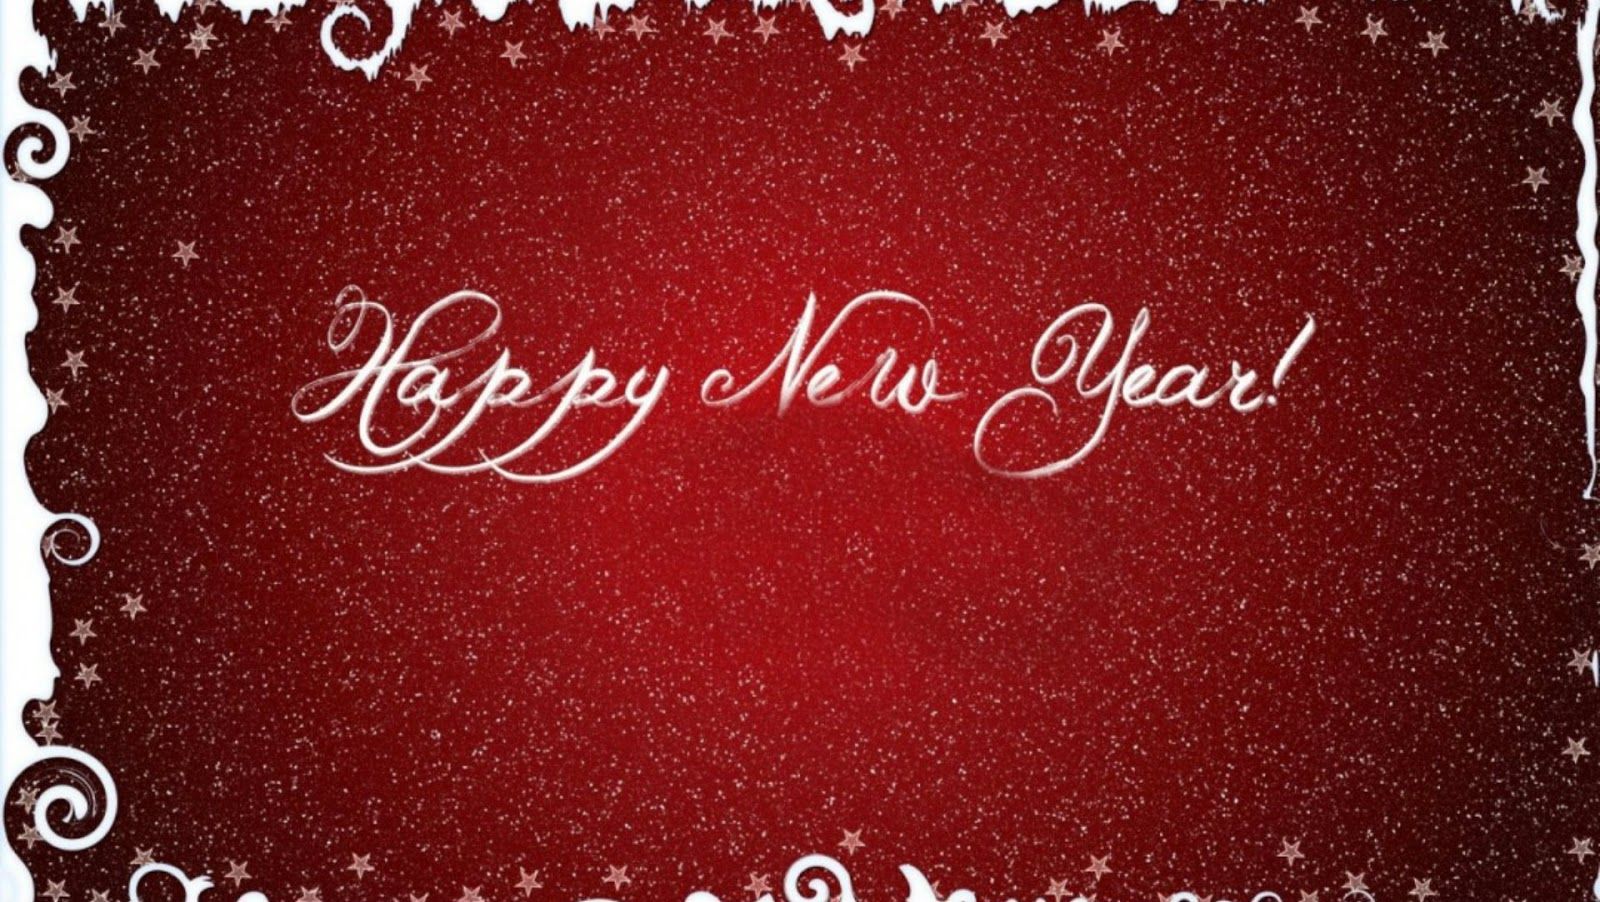 Happy New Year Cards Hd - HD Wallpaper 